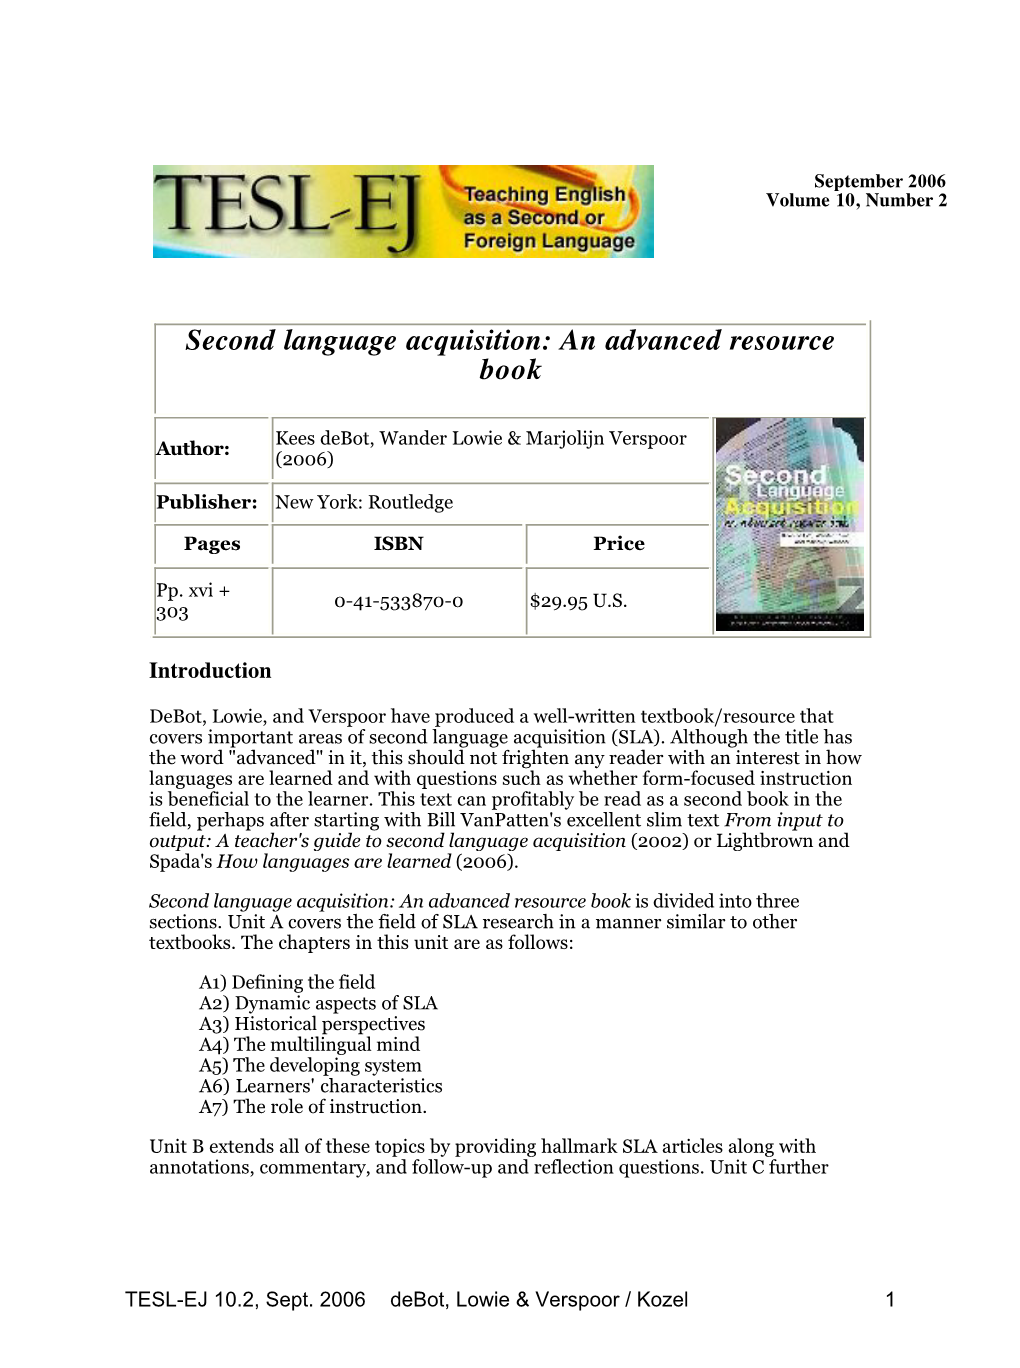 Second Language Acquisition: an Advanced Resource Book